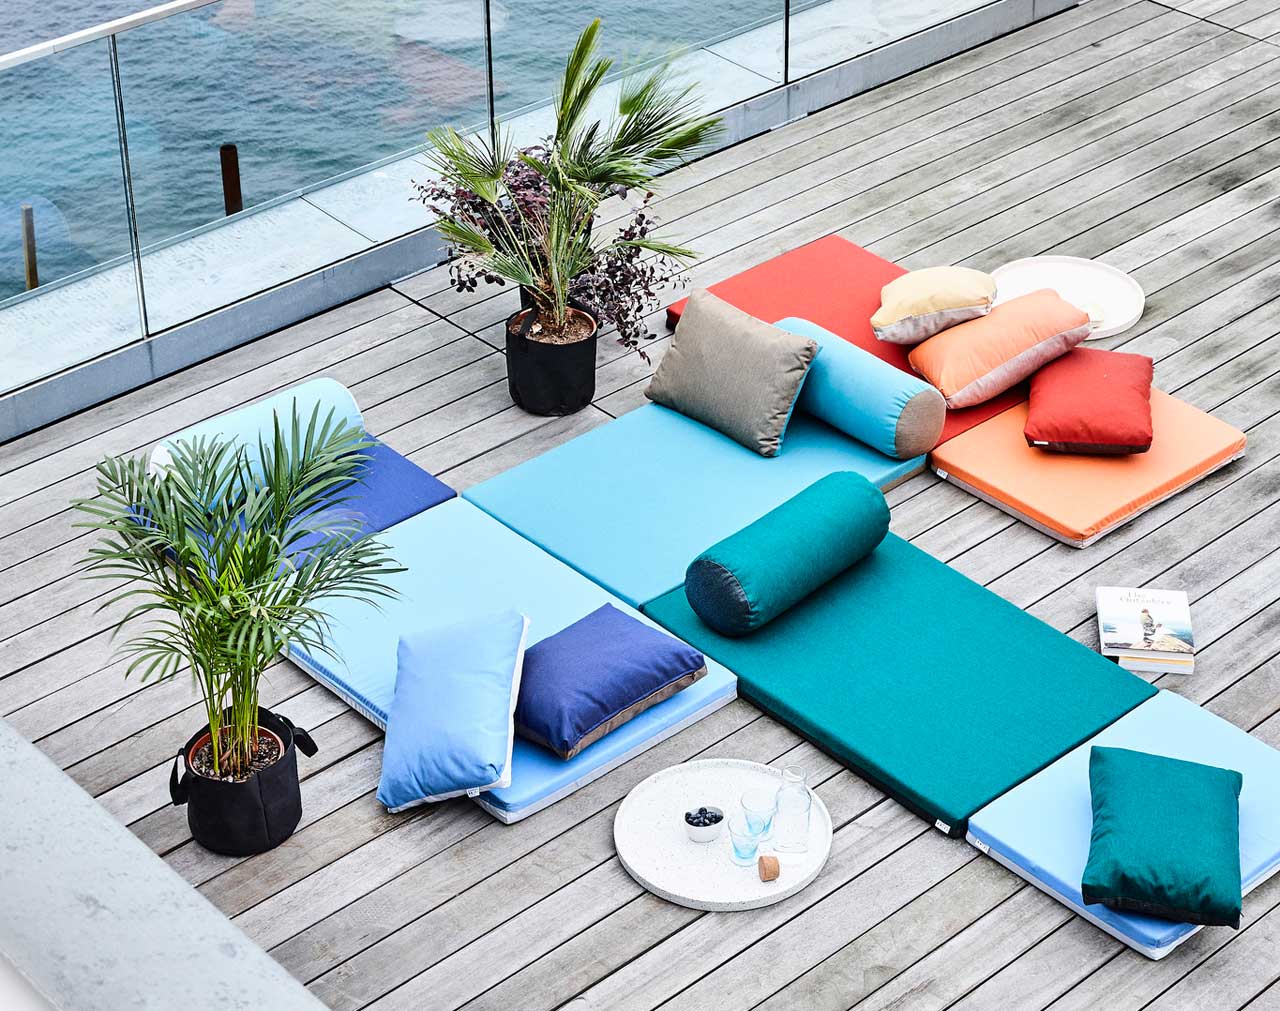 Connect is a bold mattress and cushion collection to decorate your outdoor space